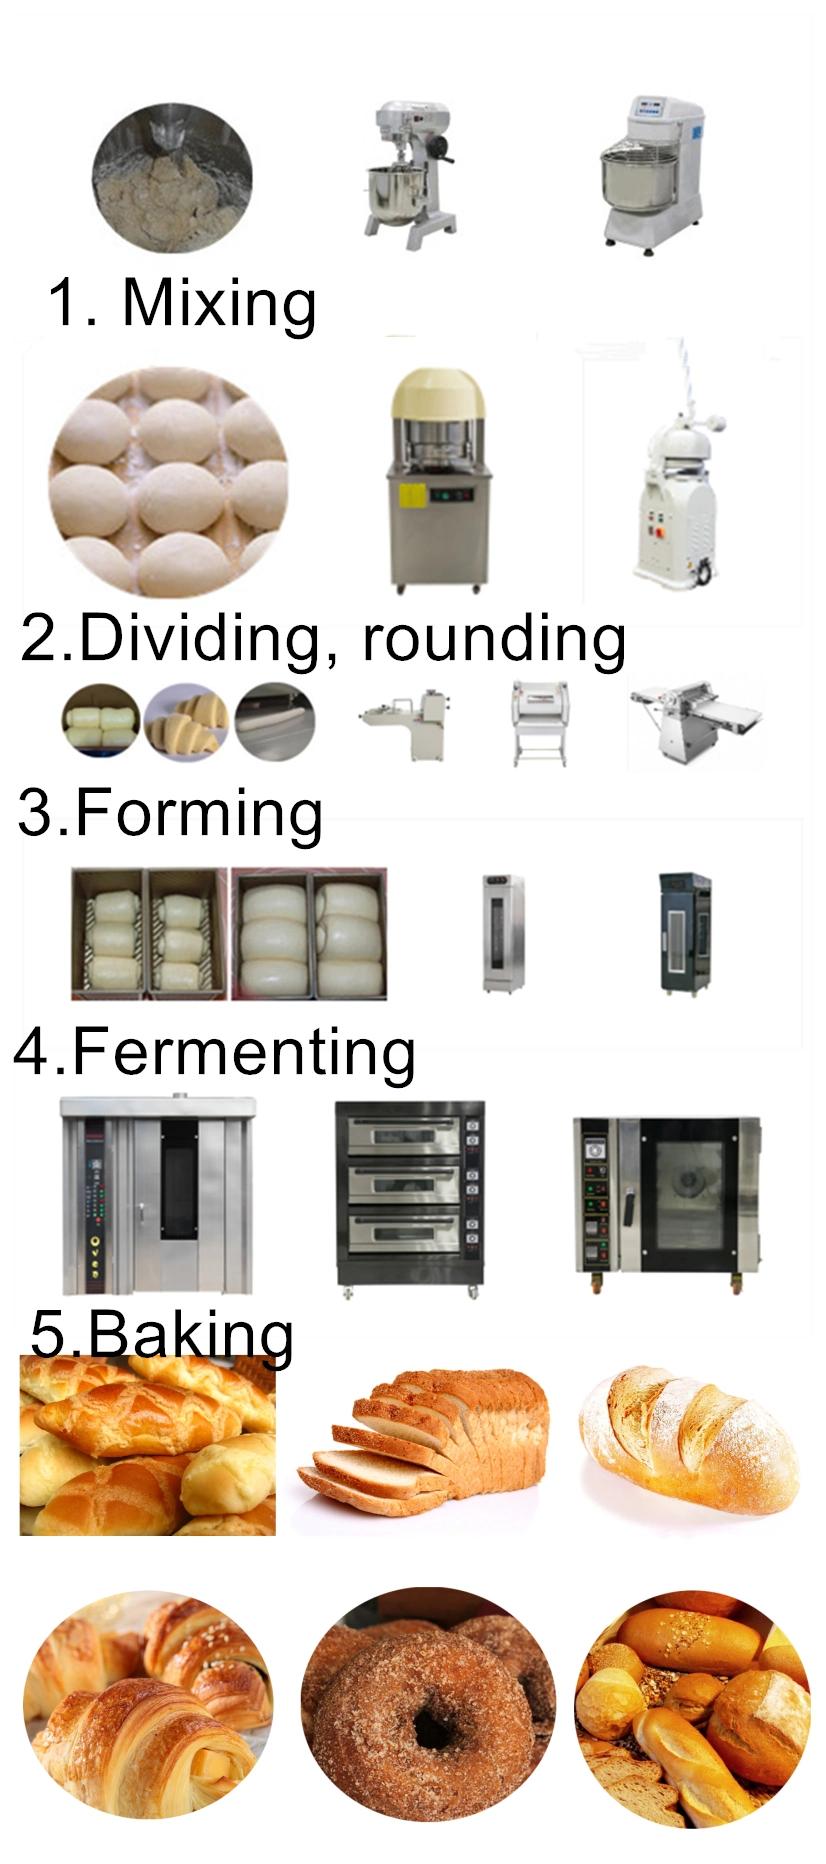 68/32/16 Trays Bakery Equipment Convection Oven Pizza Oven Tunnel Oven Pizza Baking Oven Gas Bread Maker Rotary Baking Oven Electric Bakery Equipment Machine